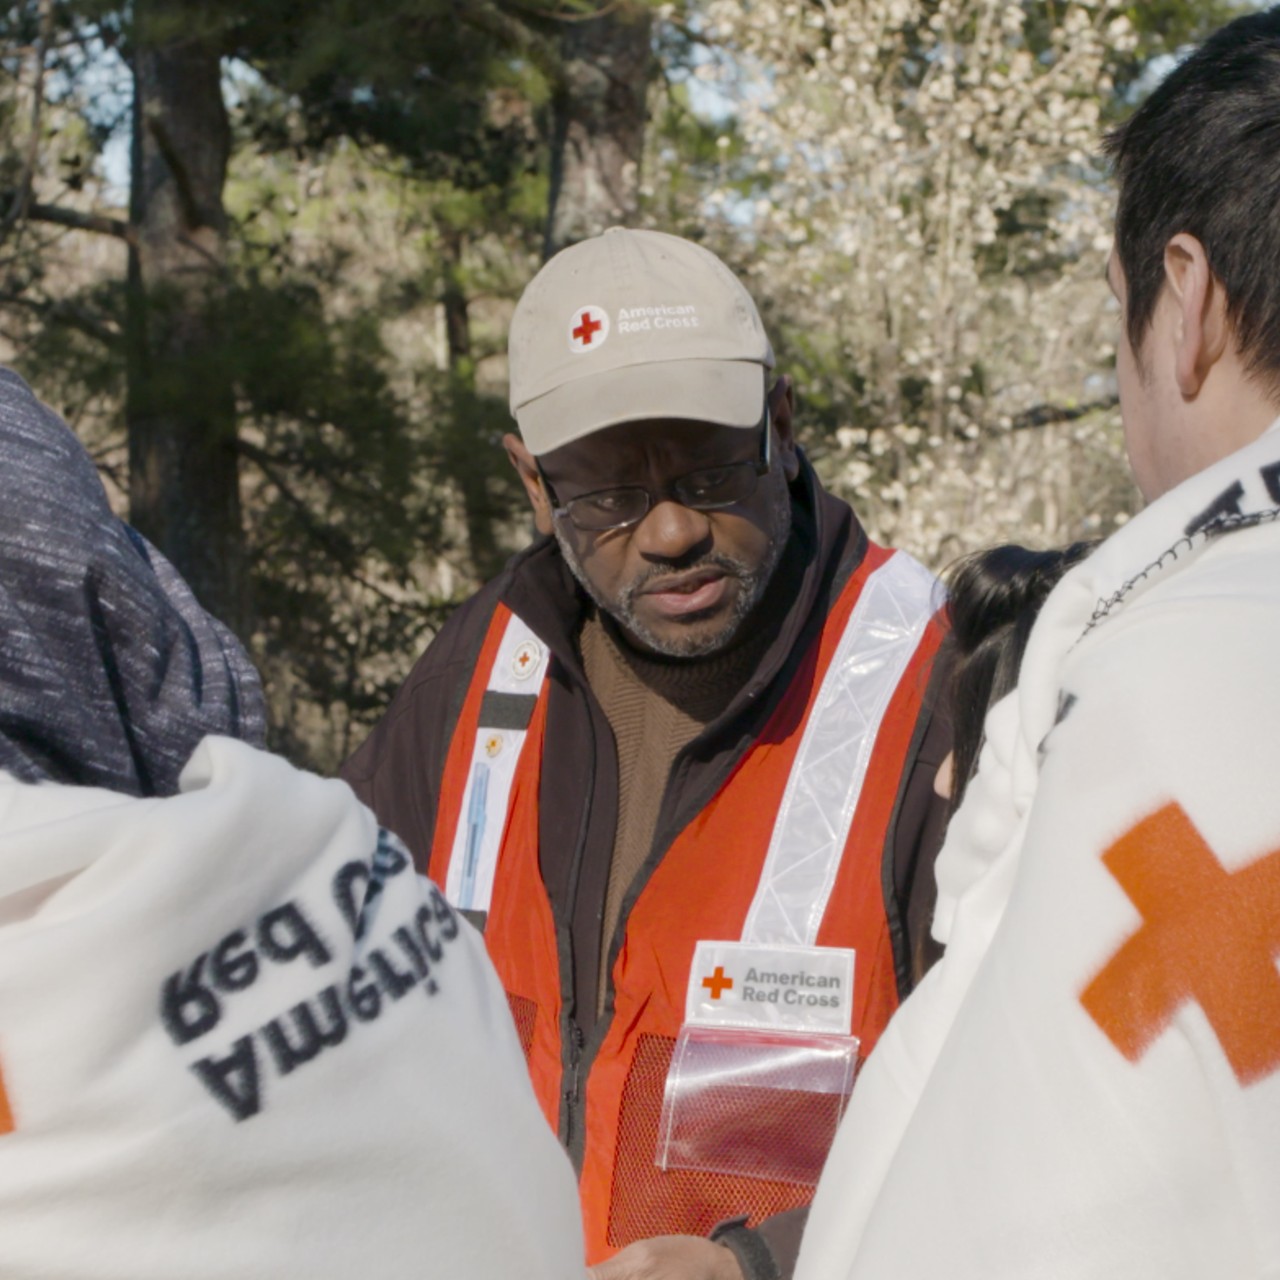 Disaster Action Team by Impact Designs for the American Red Cross 